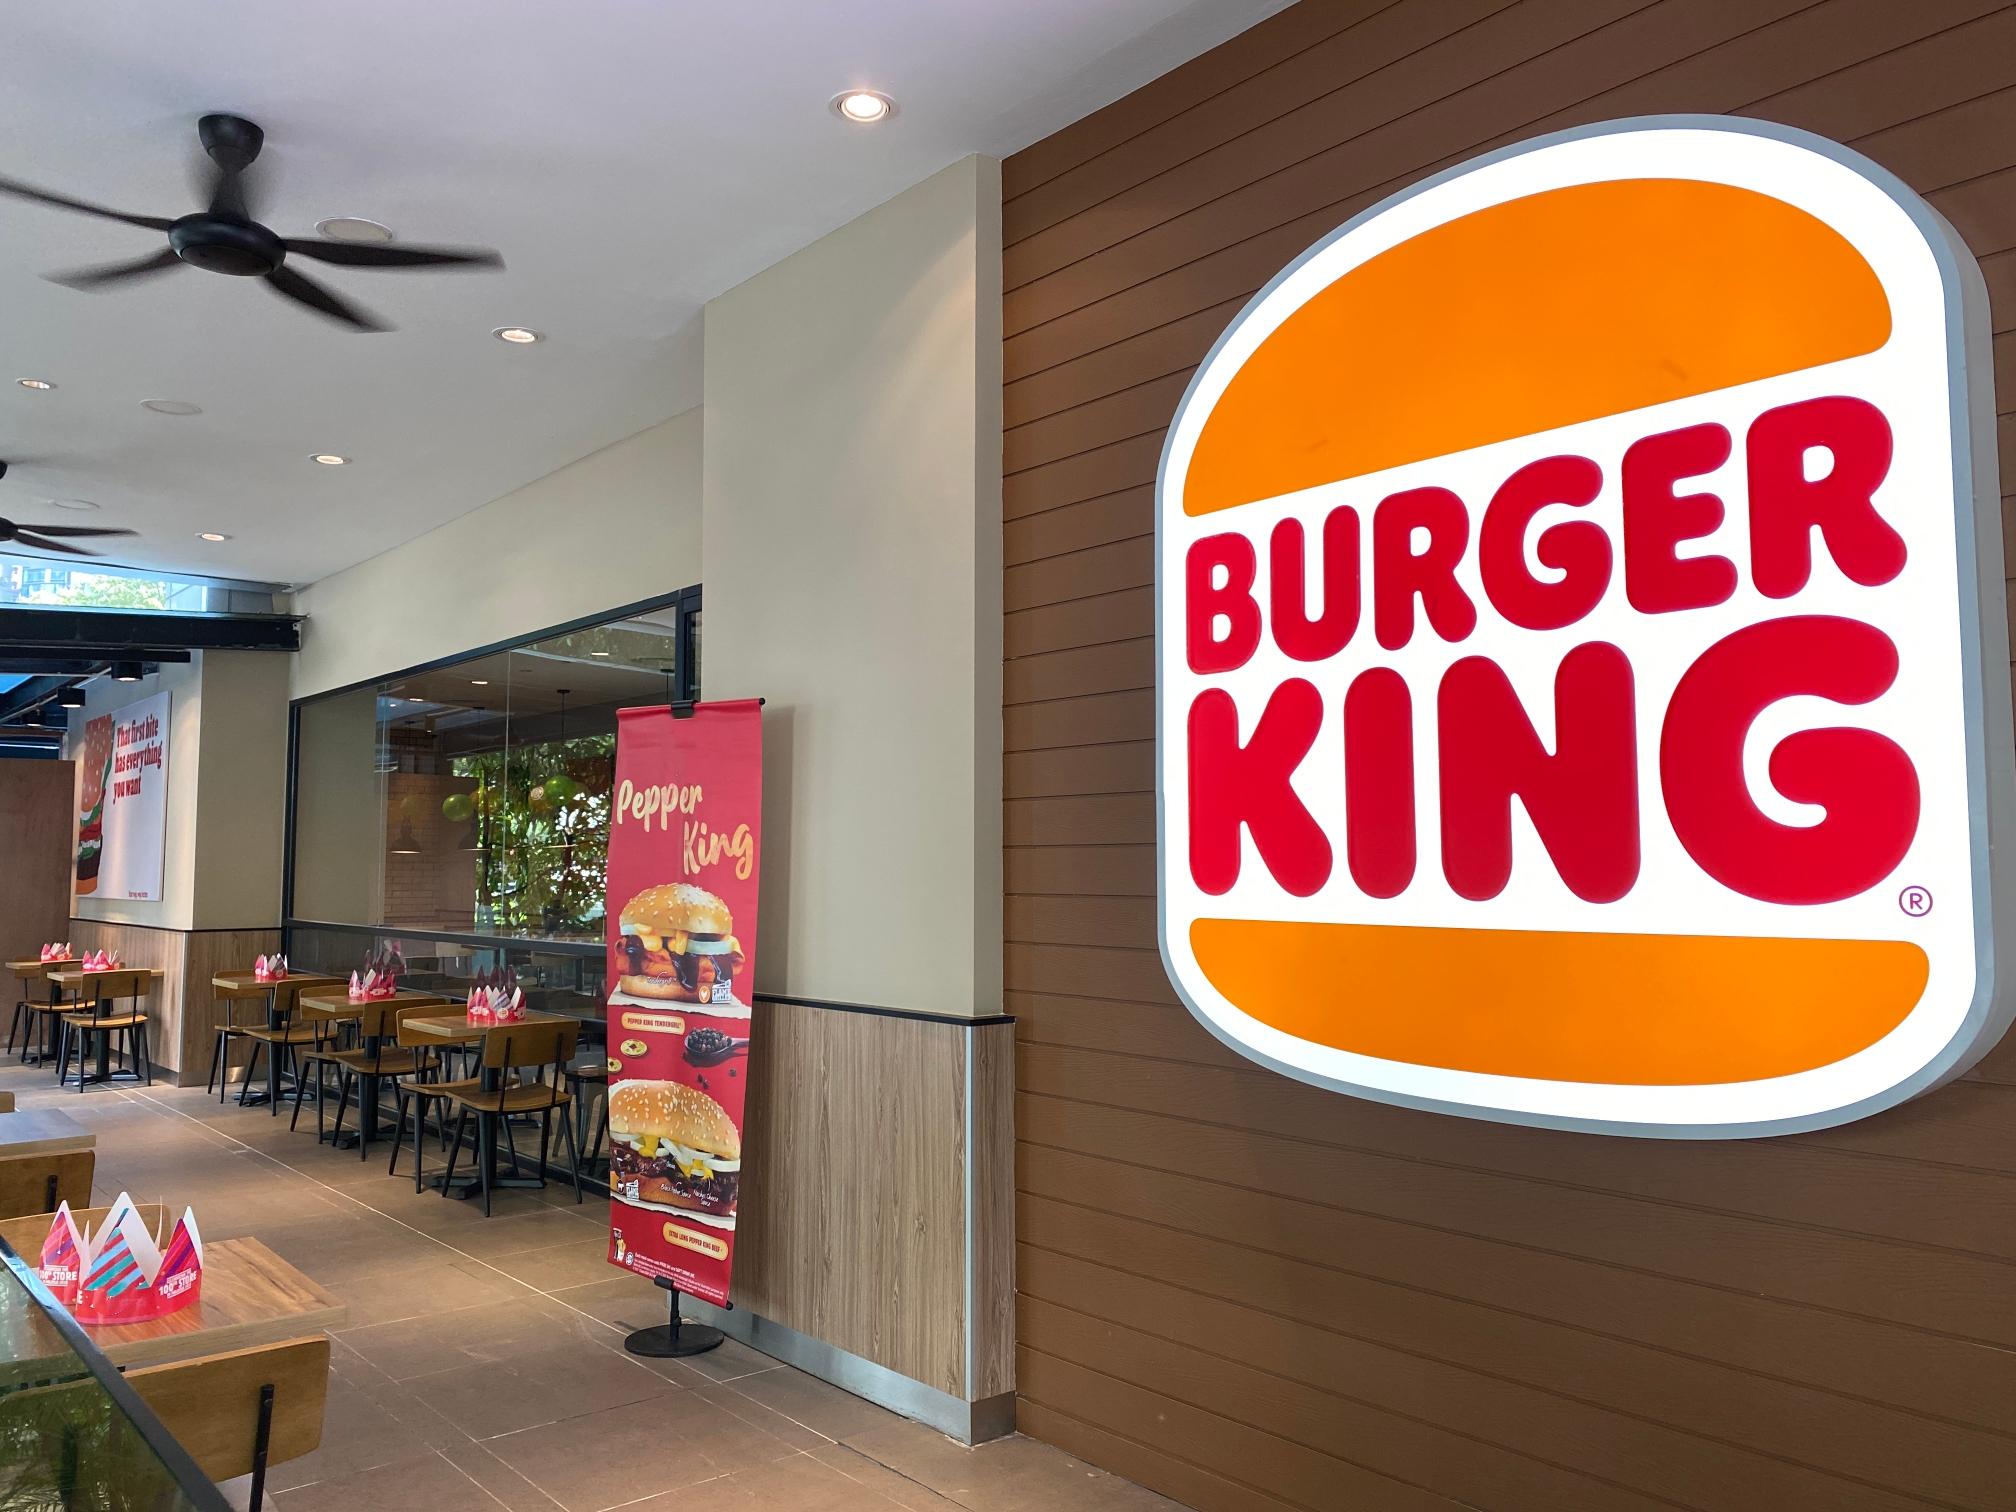 Burger King Malaysia says its new restaurant design will facilitate health measures put in place to curb the spread of Covid-19.